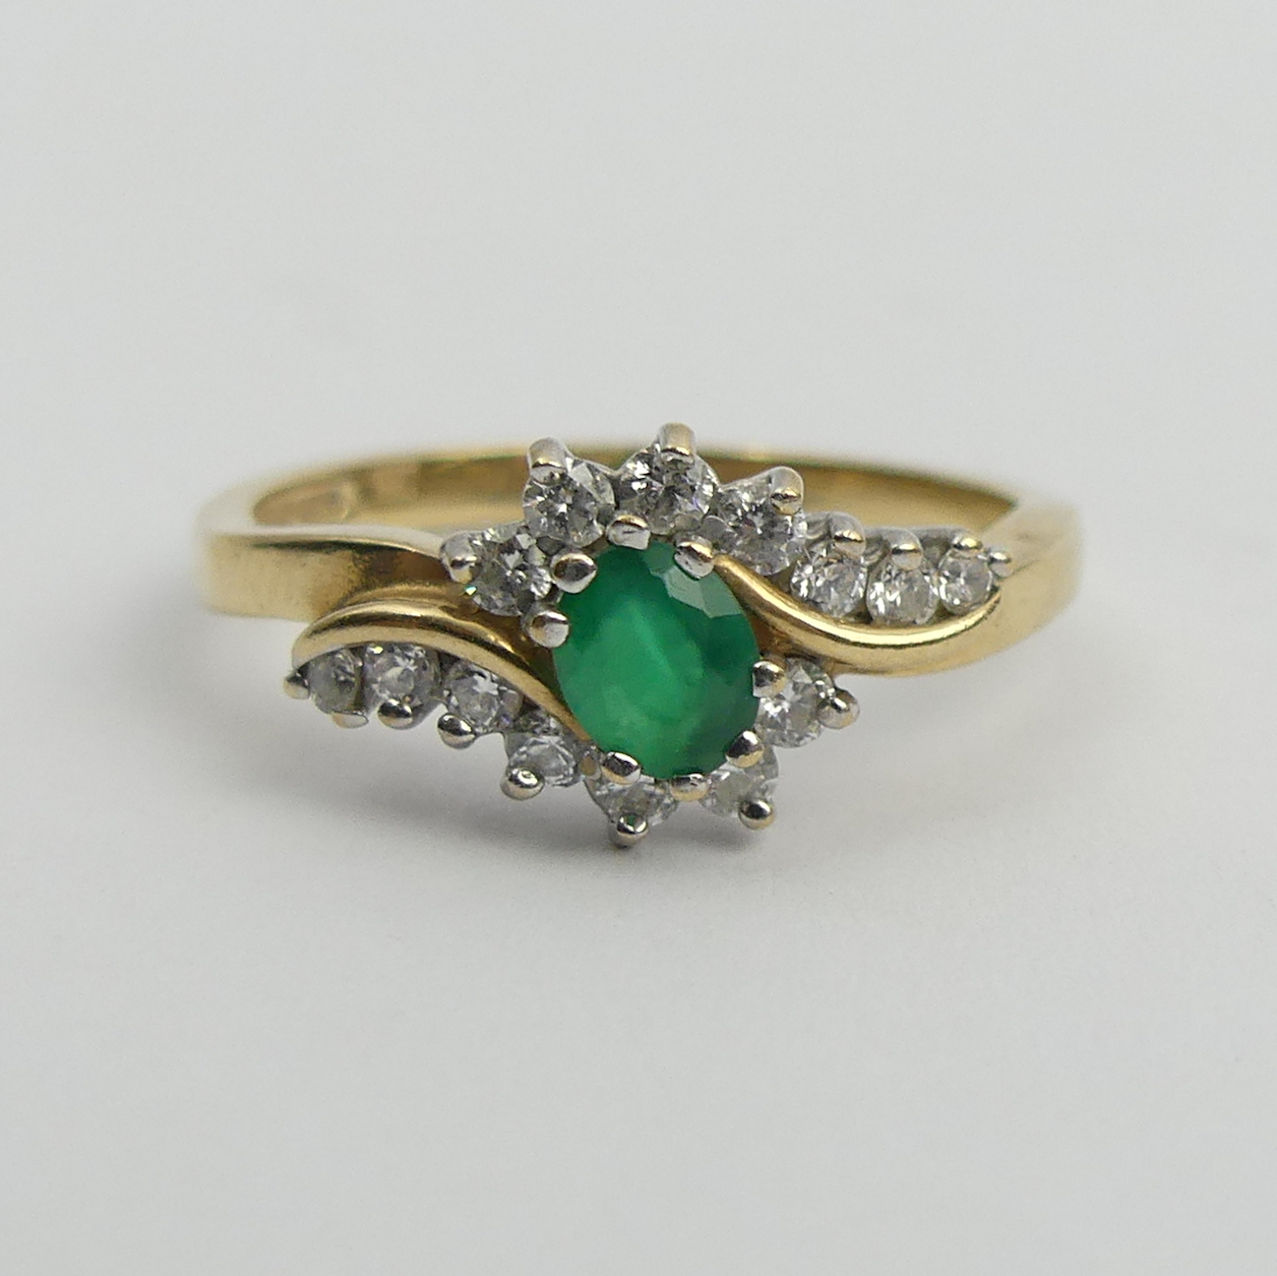 9ct gold green and white stone ring, 2.6 grams. Size P, 9 mm wide. UK Postage £12. - Image 2 of 6